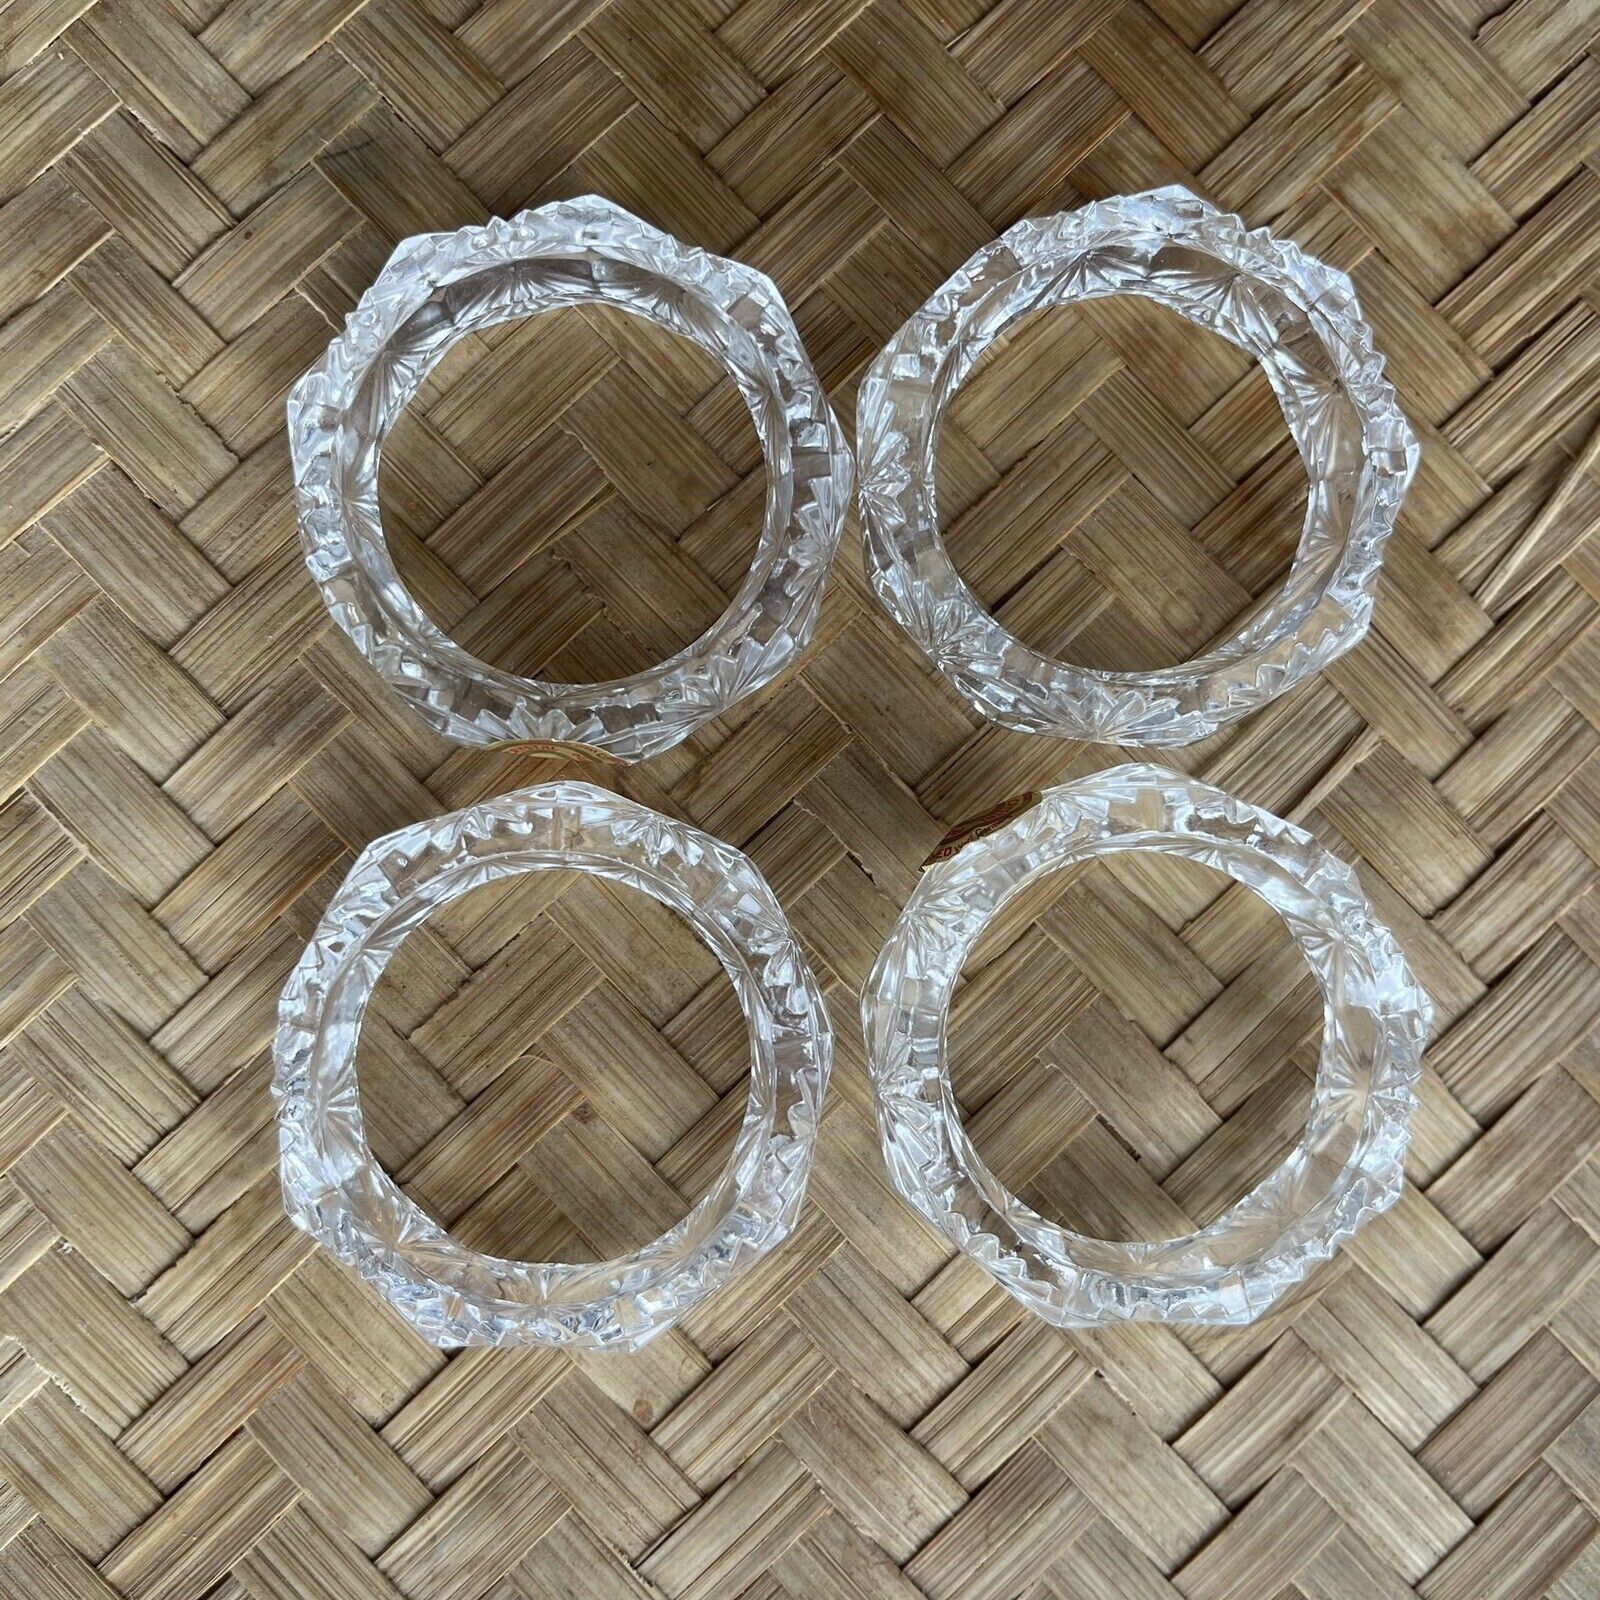 Lot of 4 Vintage RARE West Germany Over 24% PBO Lead Crystal Napkin Rings